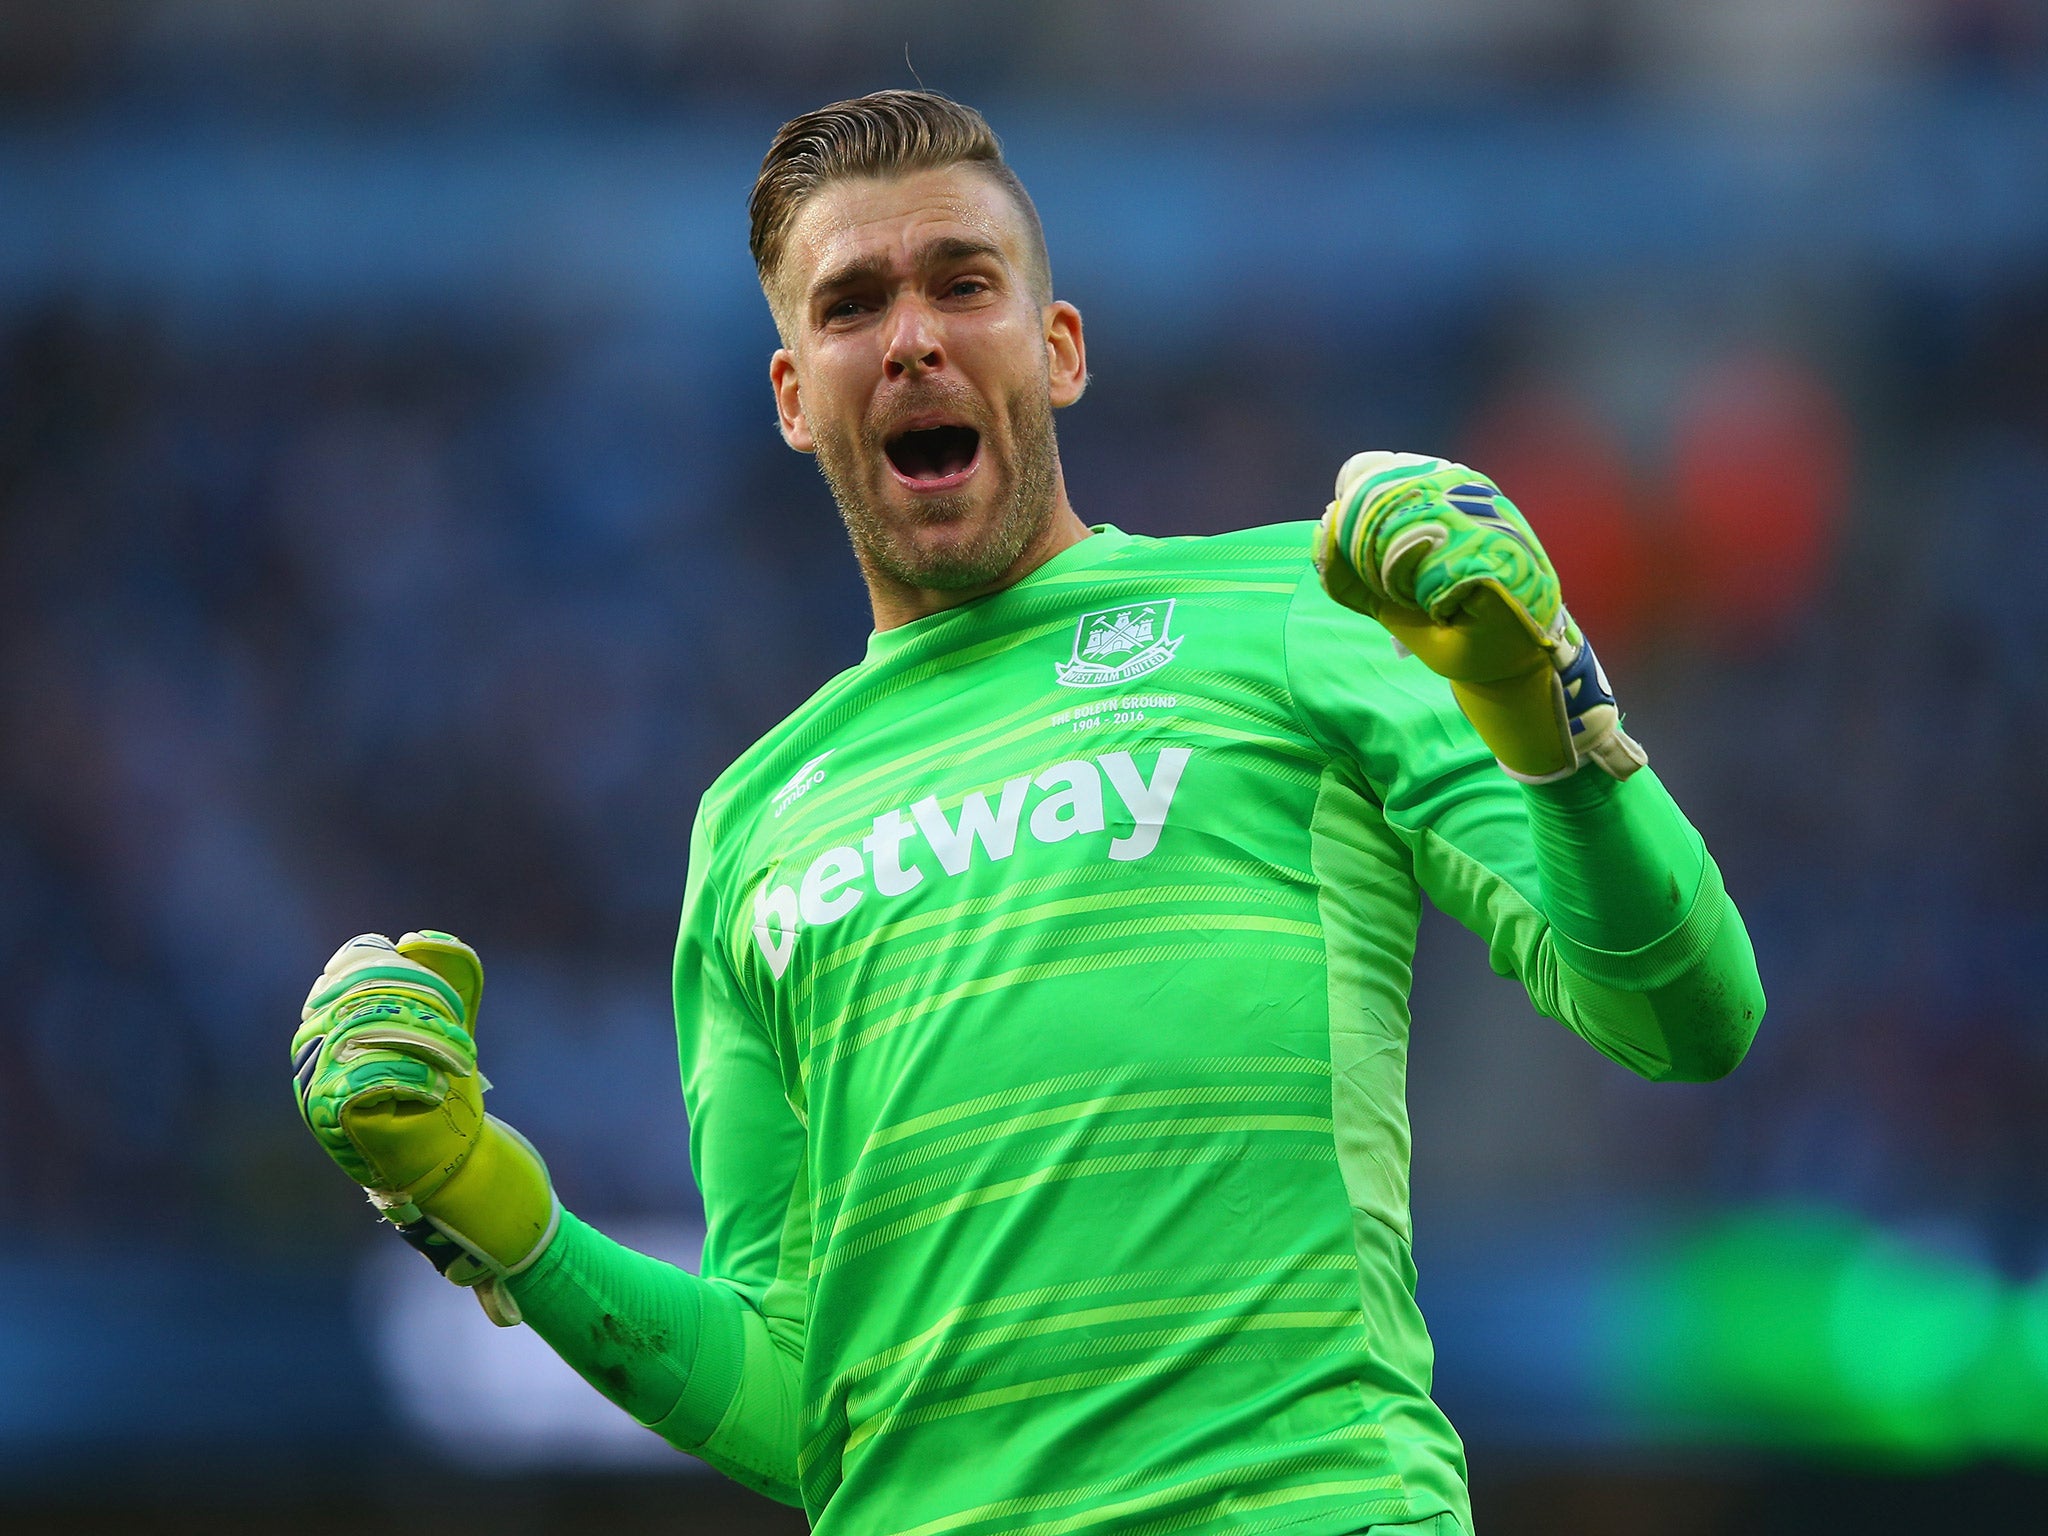 &#13;
Adrian celebrates a goal at Manchester City&#13;